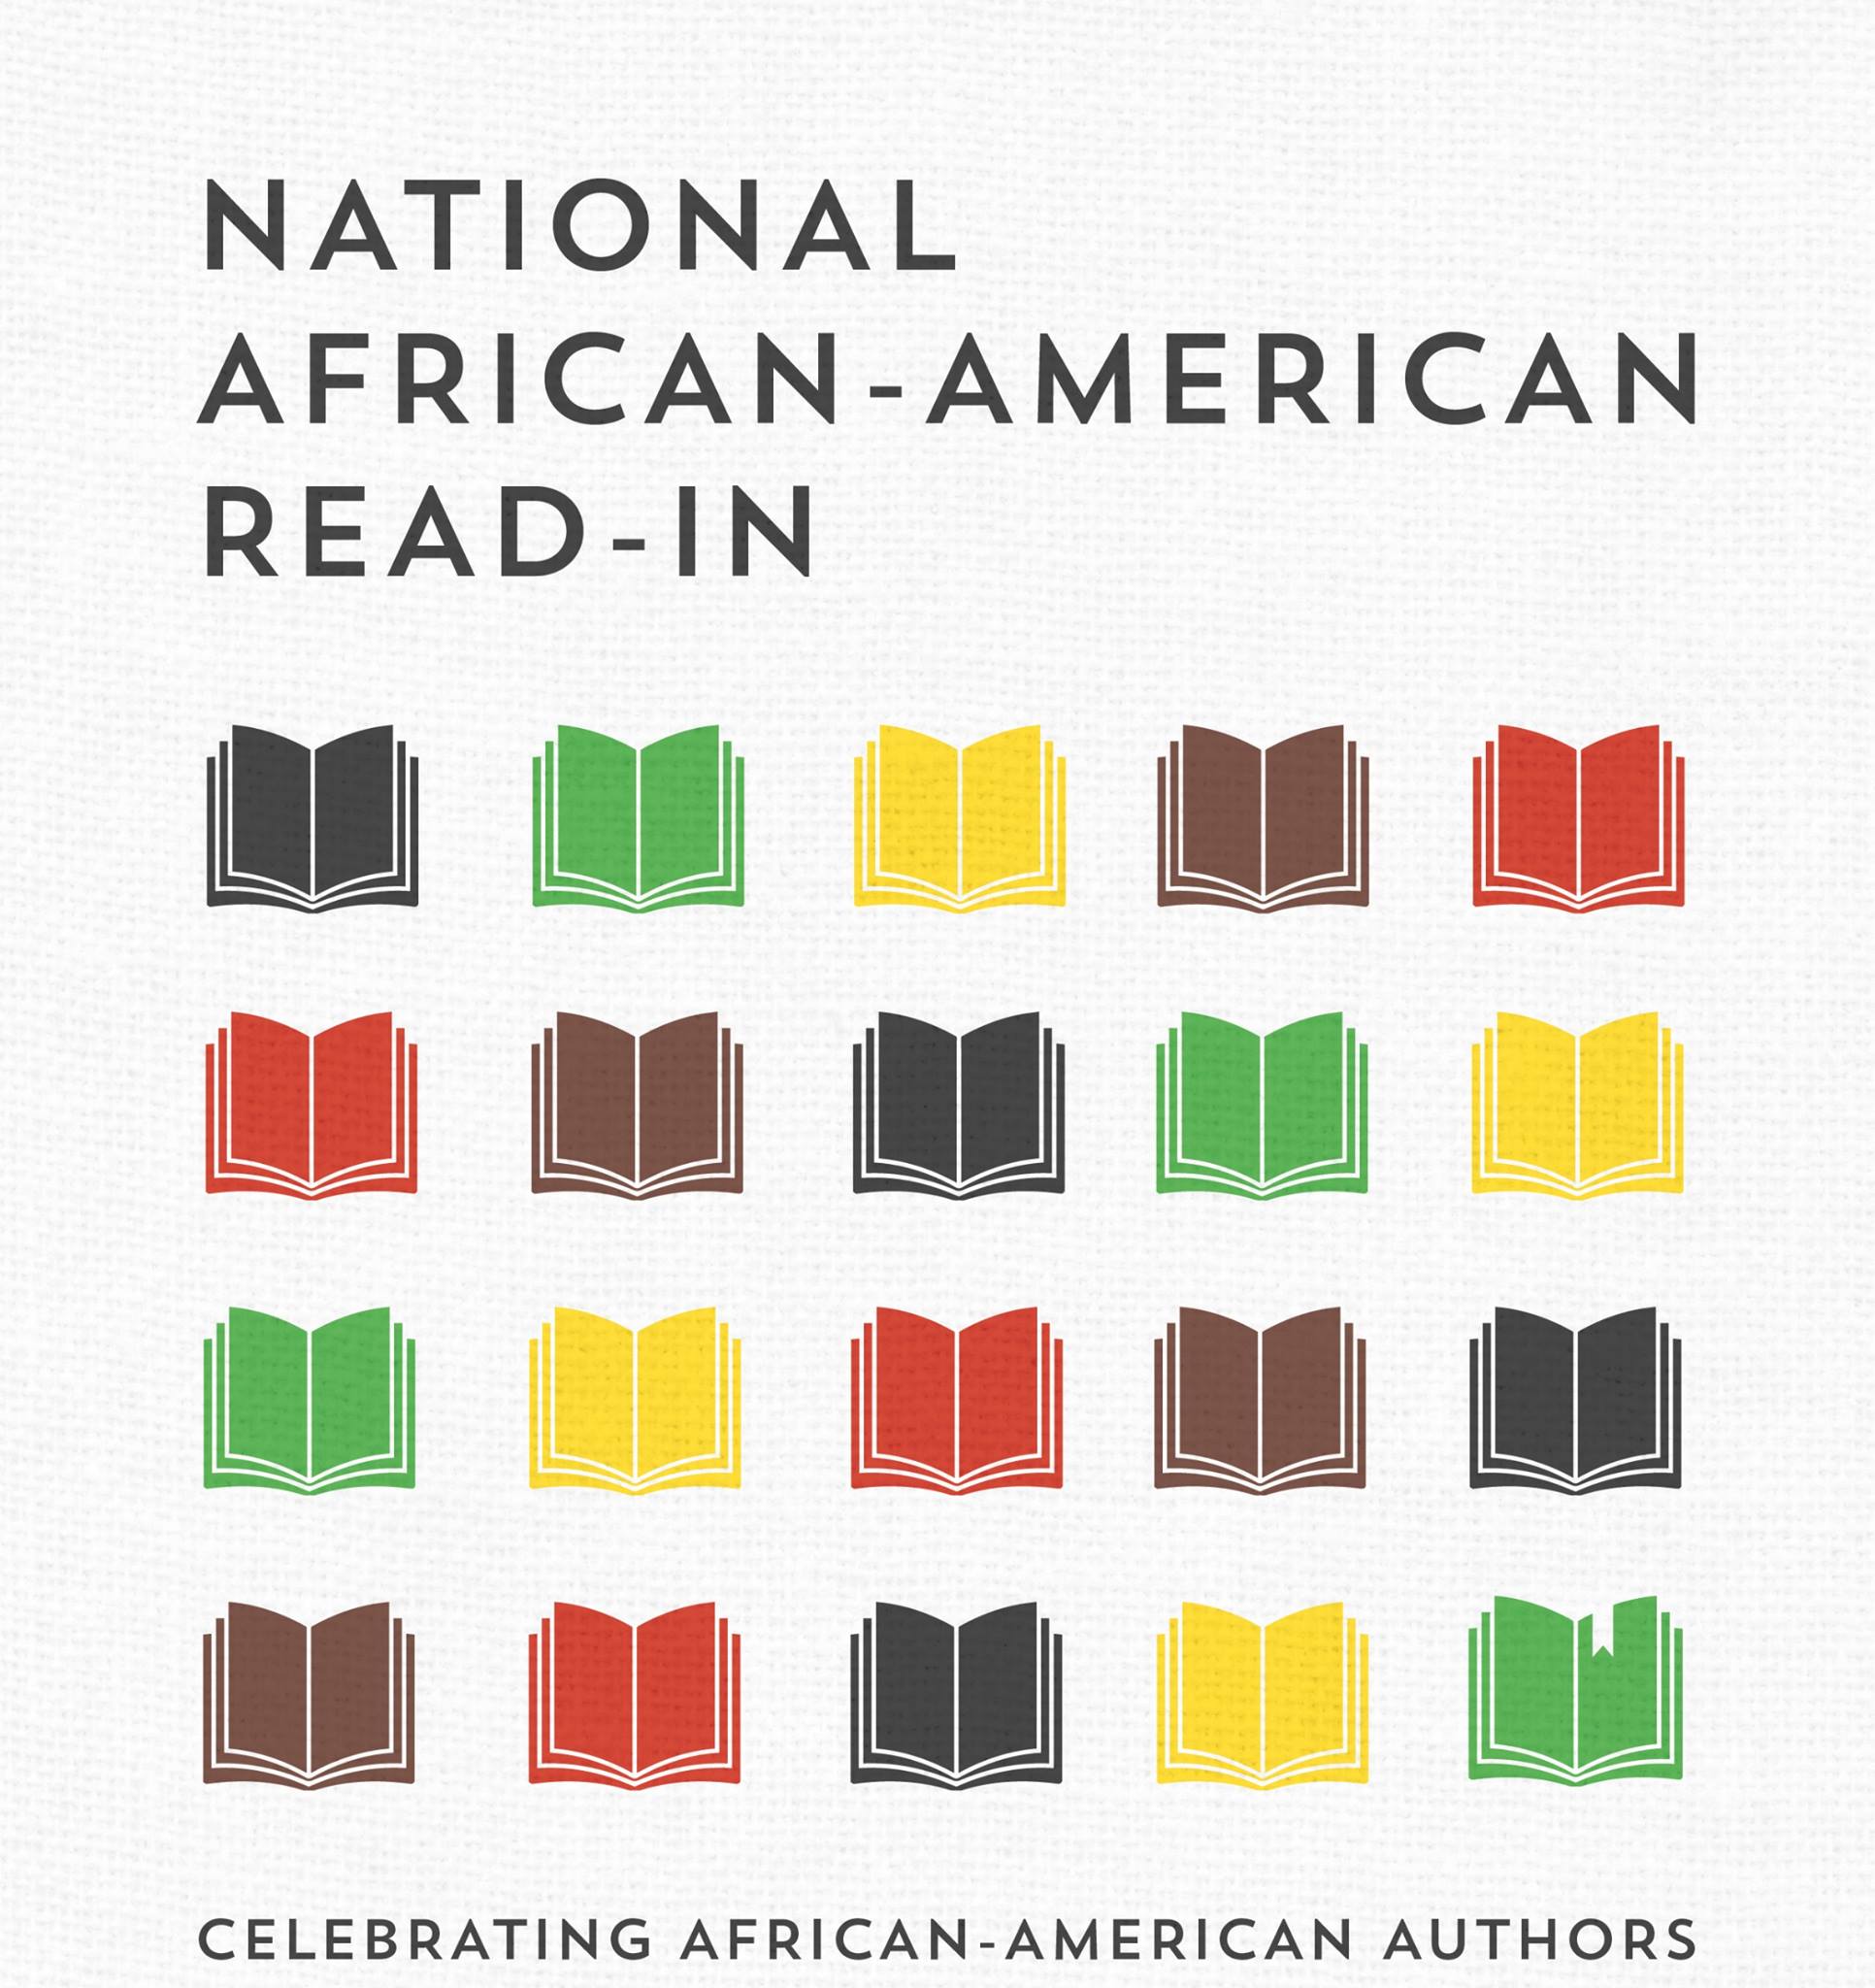 national african-american read-in